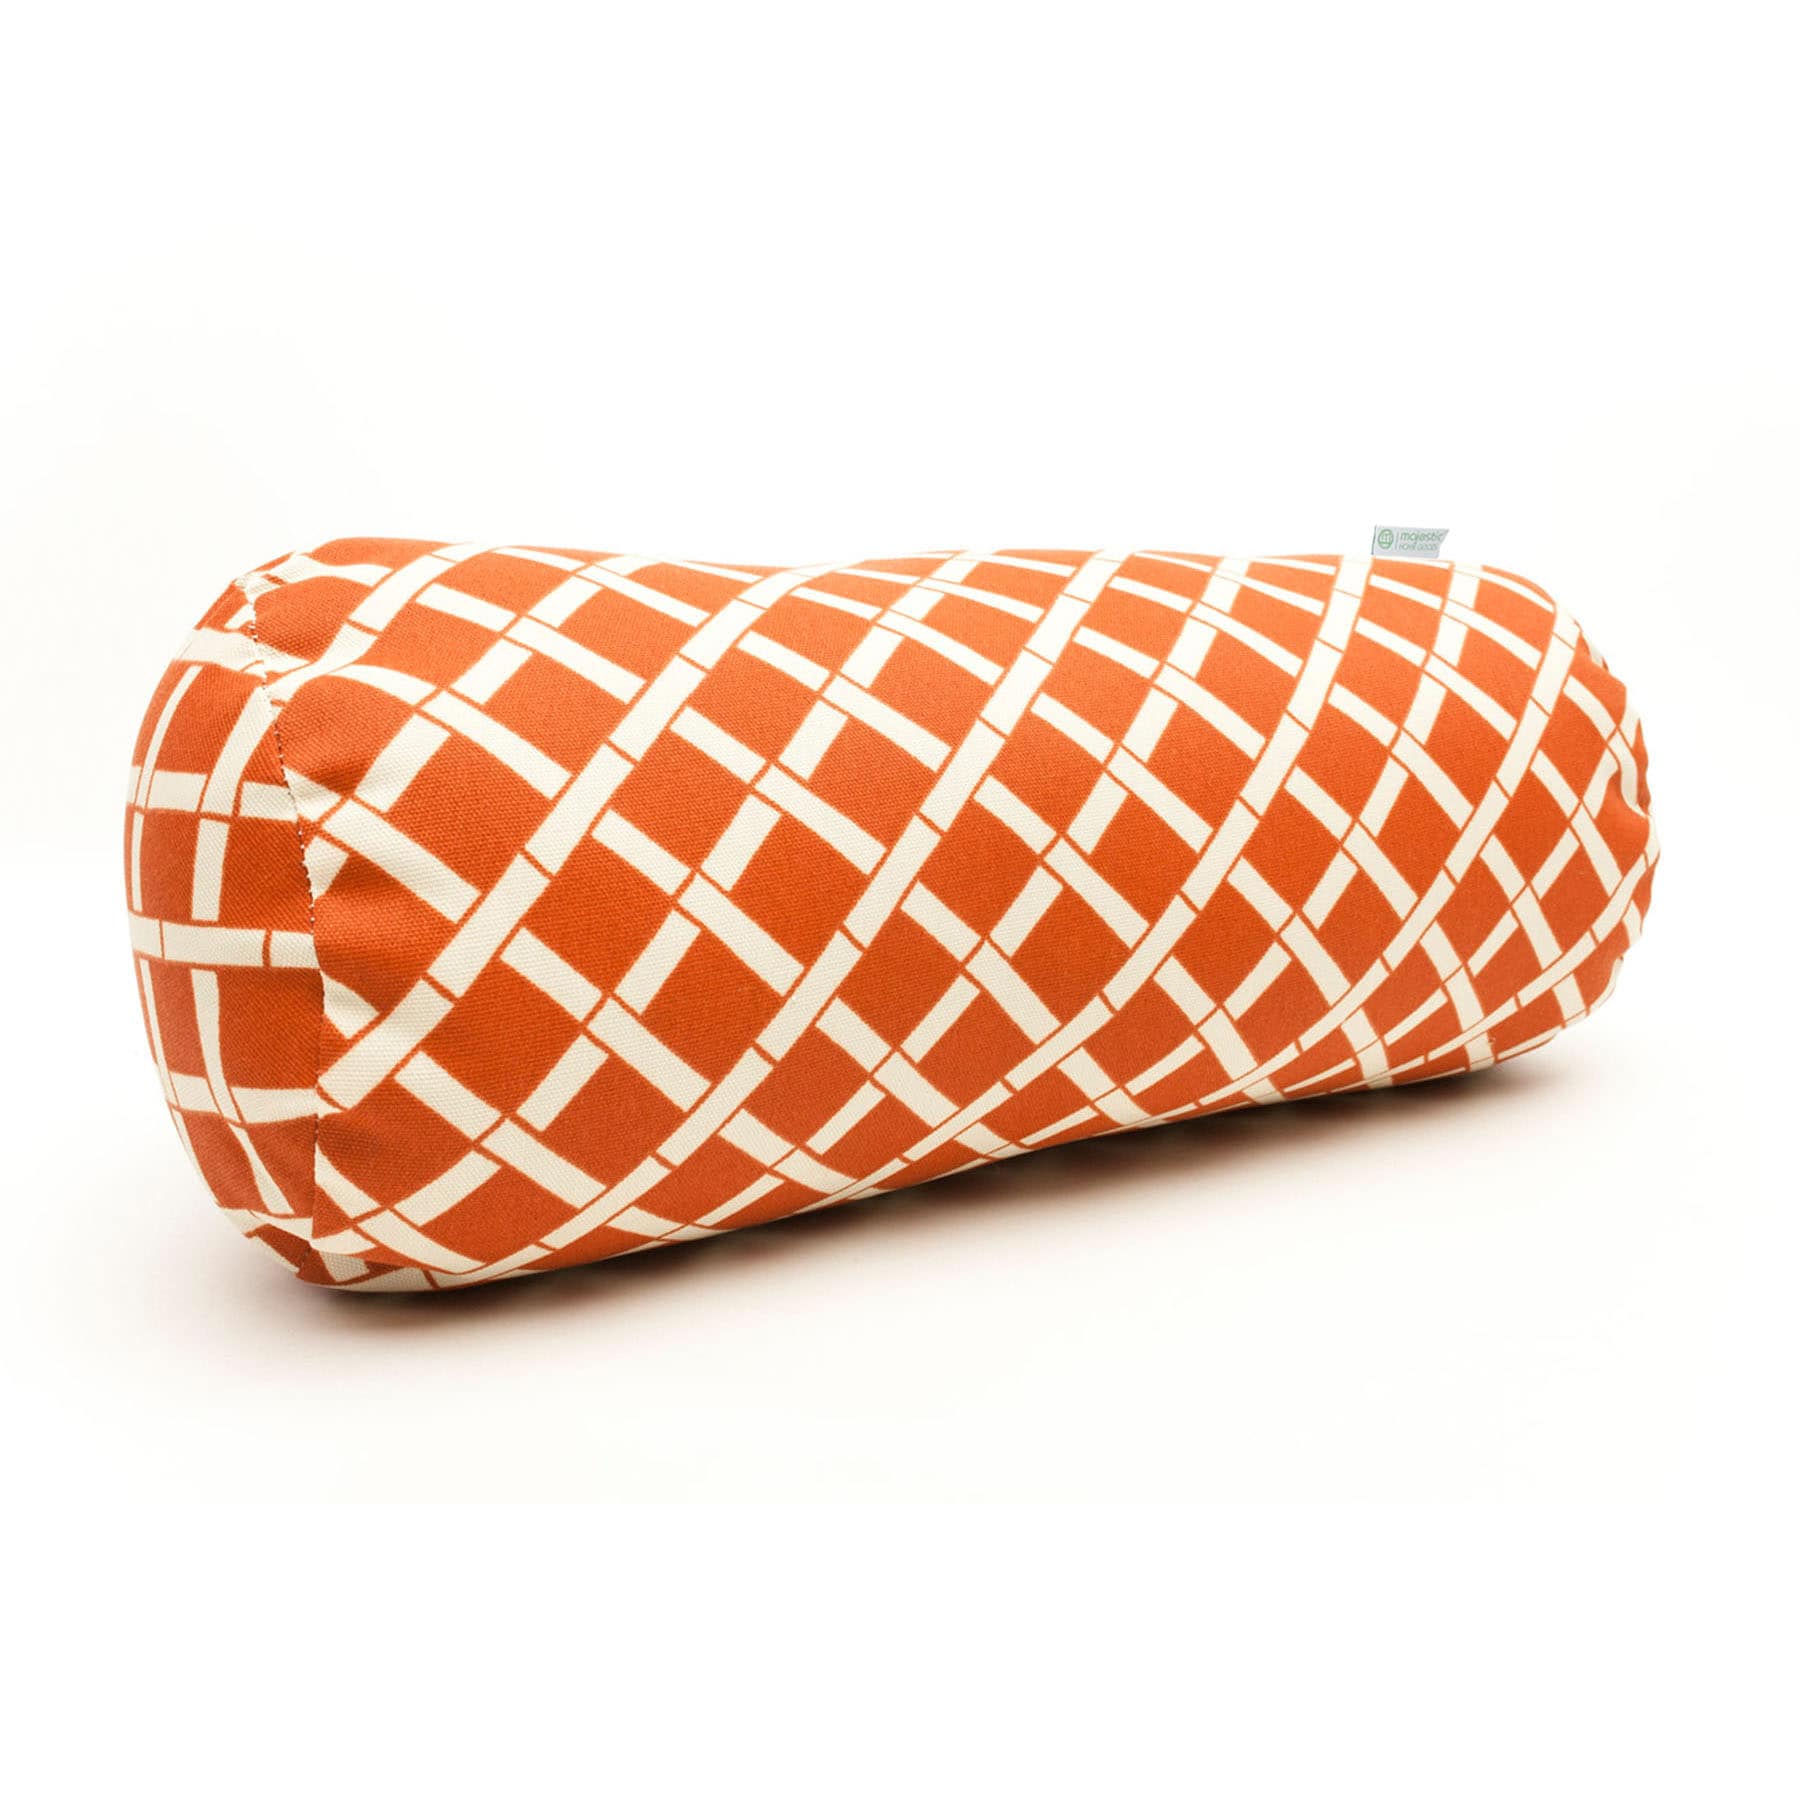 Majestic Home Goods Geometric Bolster Pillow in the Outdoor